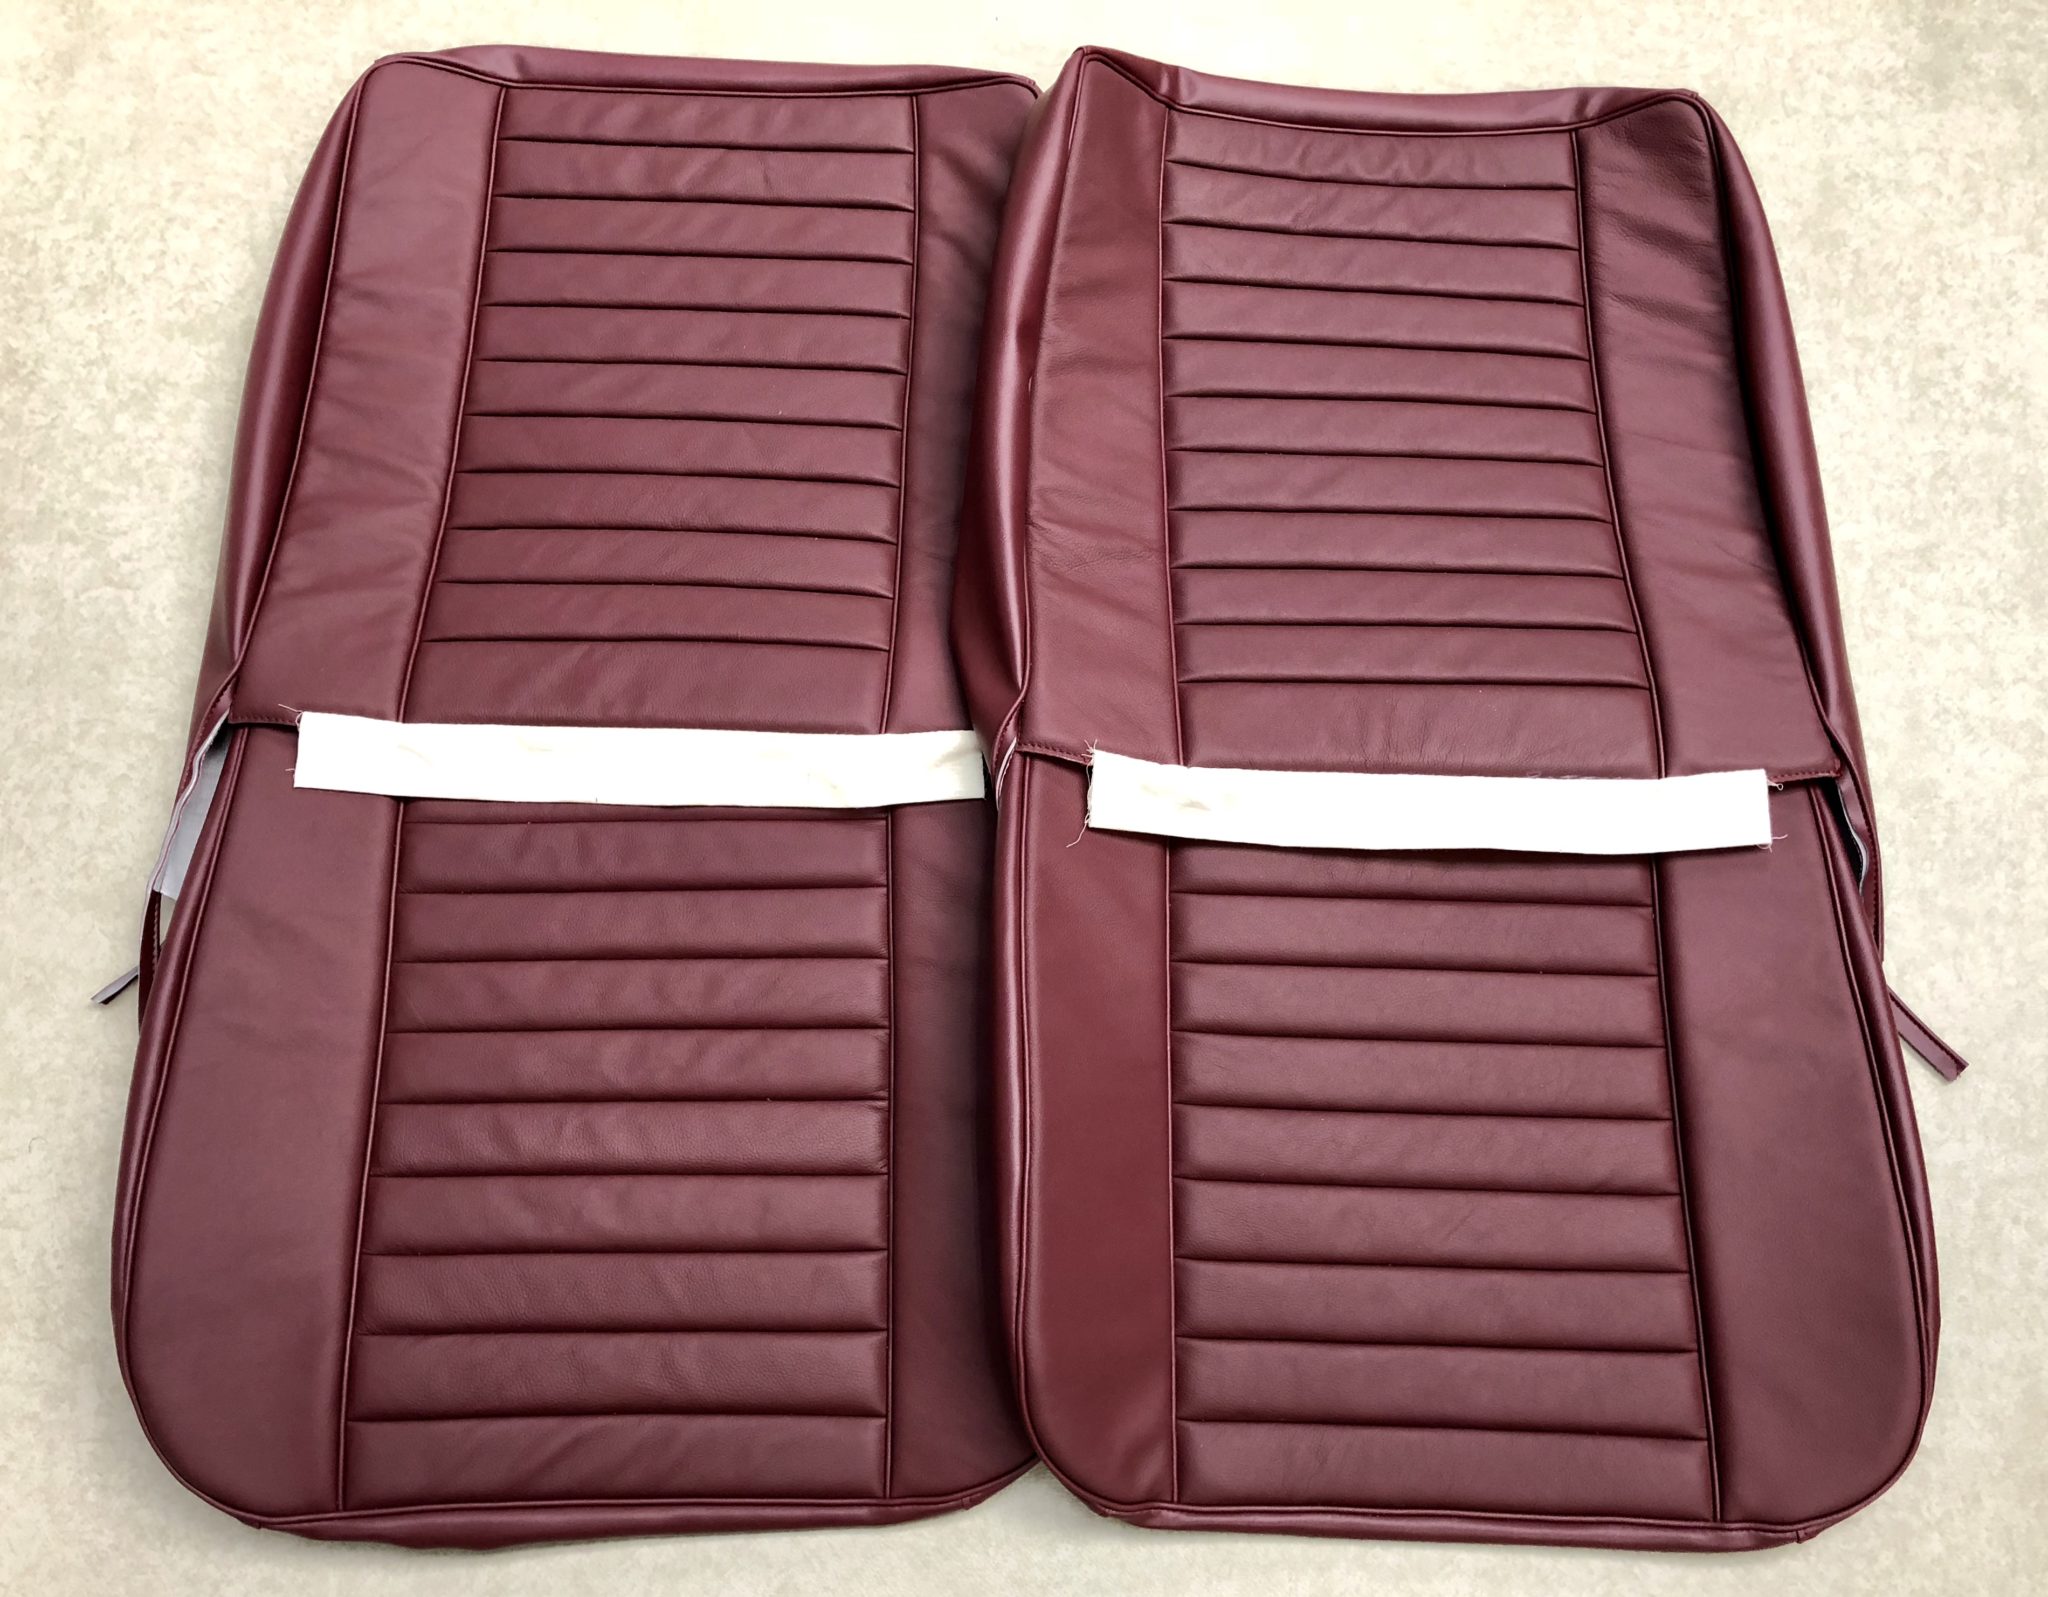 Holden Eh Premier Seat Cover Set Fronts Only Dark Red